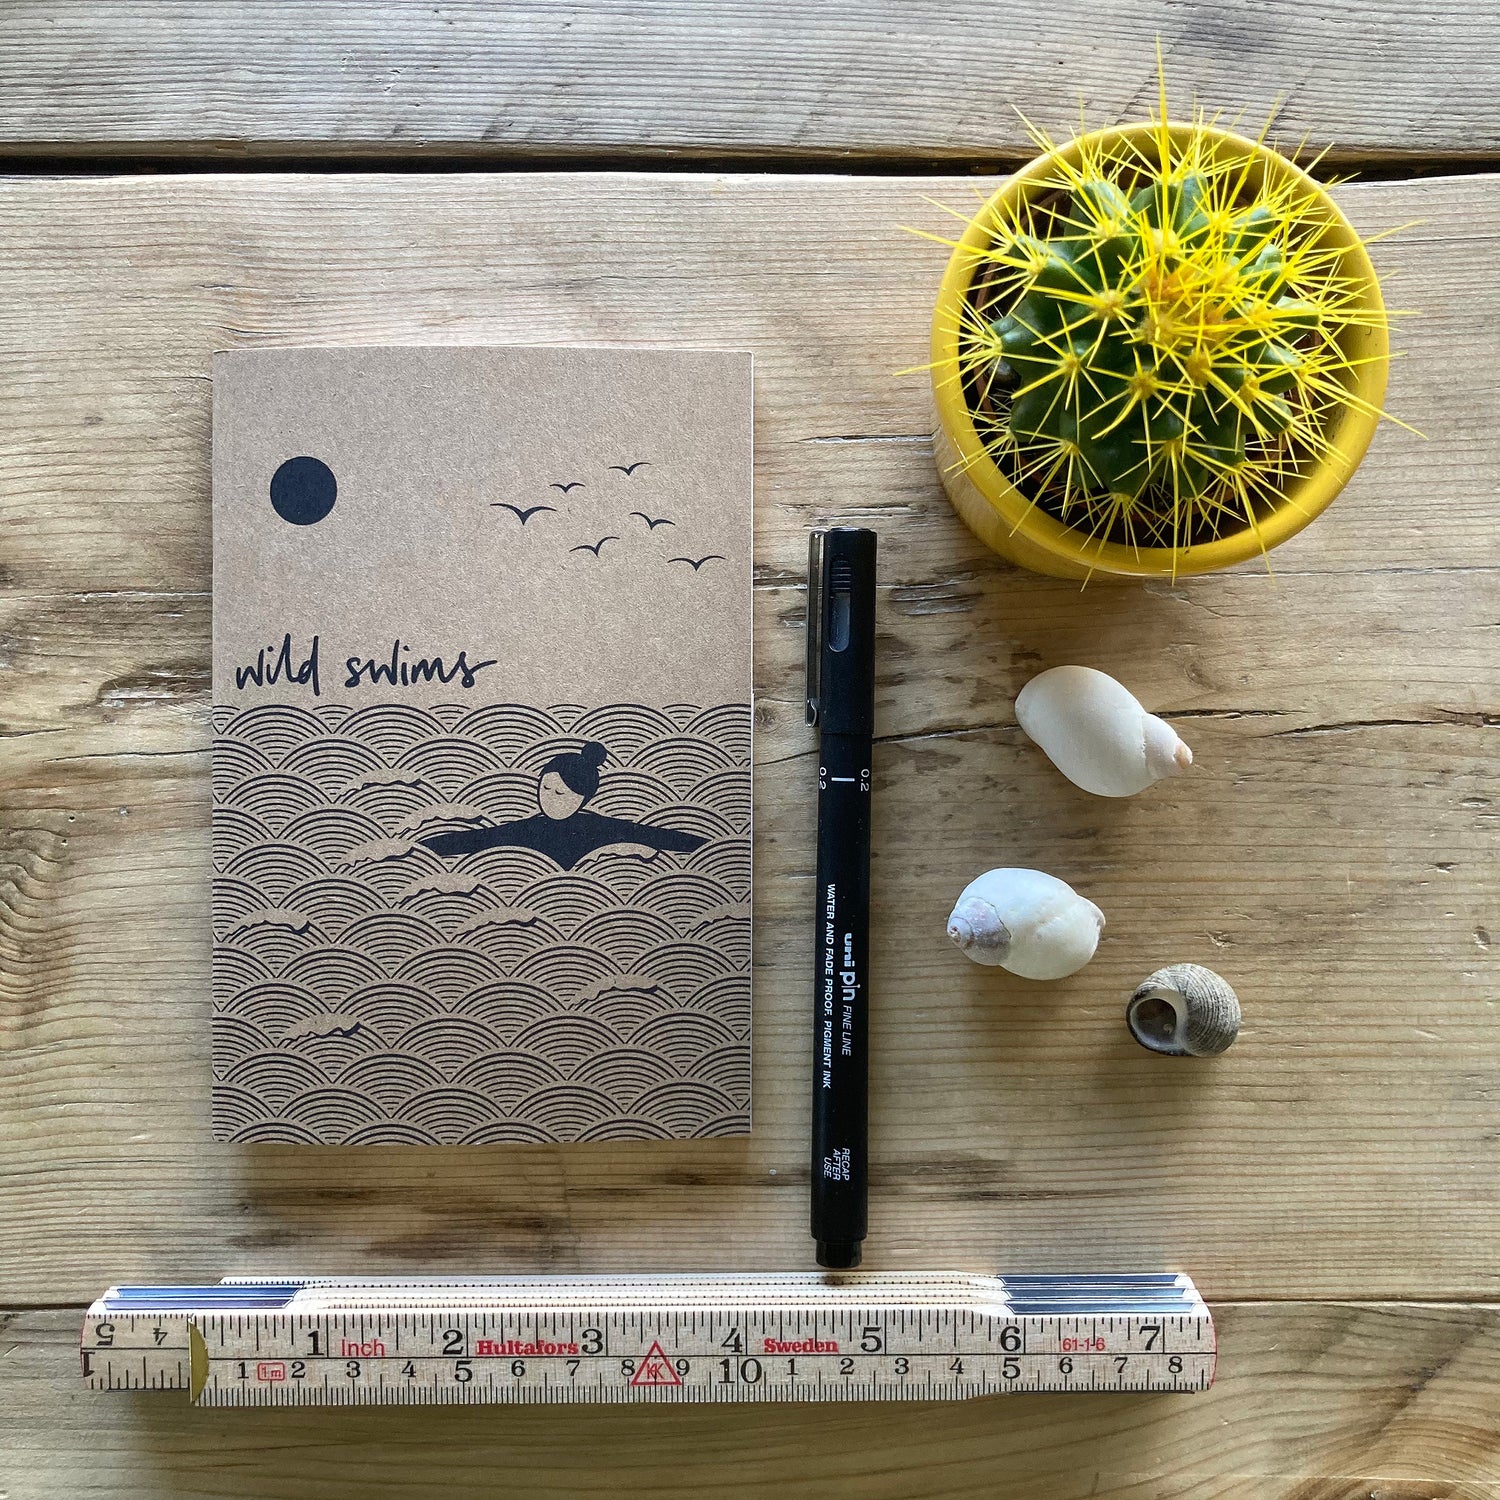 An A6 size wild swimming notebook sits on a rustic wooden table surrounded by a pen, wooden rule, three shells and a cacti in a yellow ceramic pot.